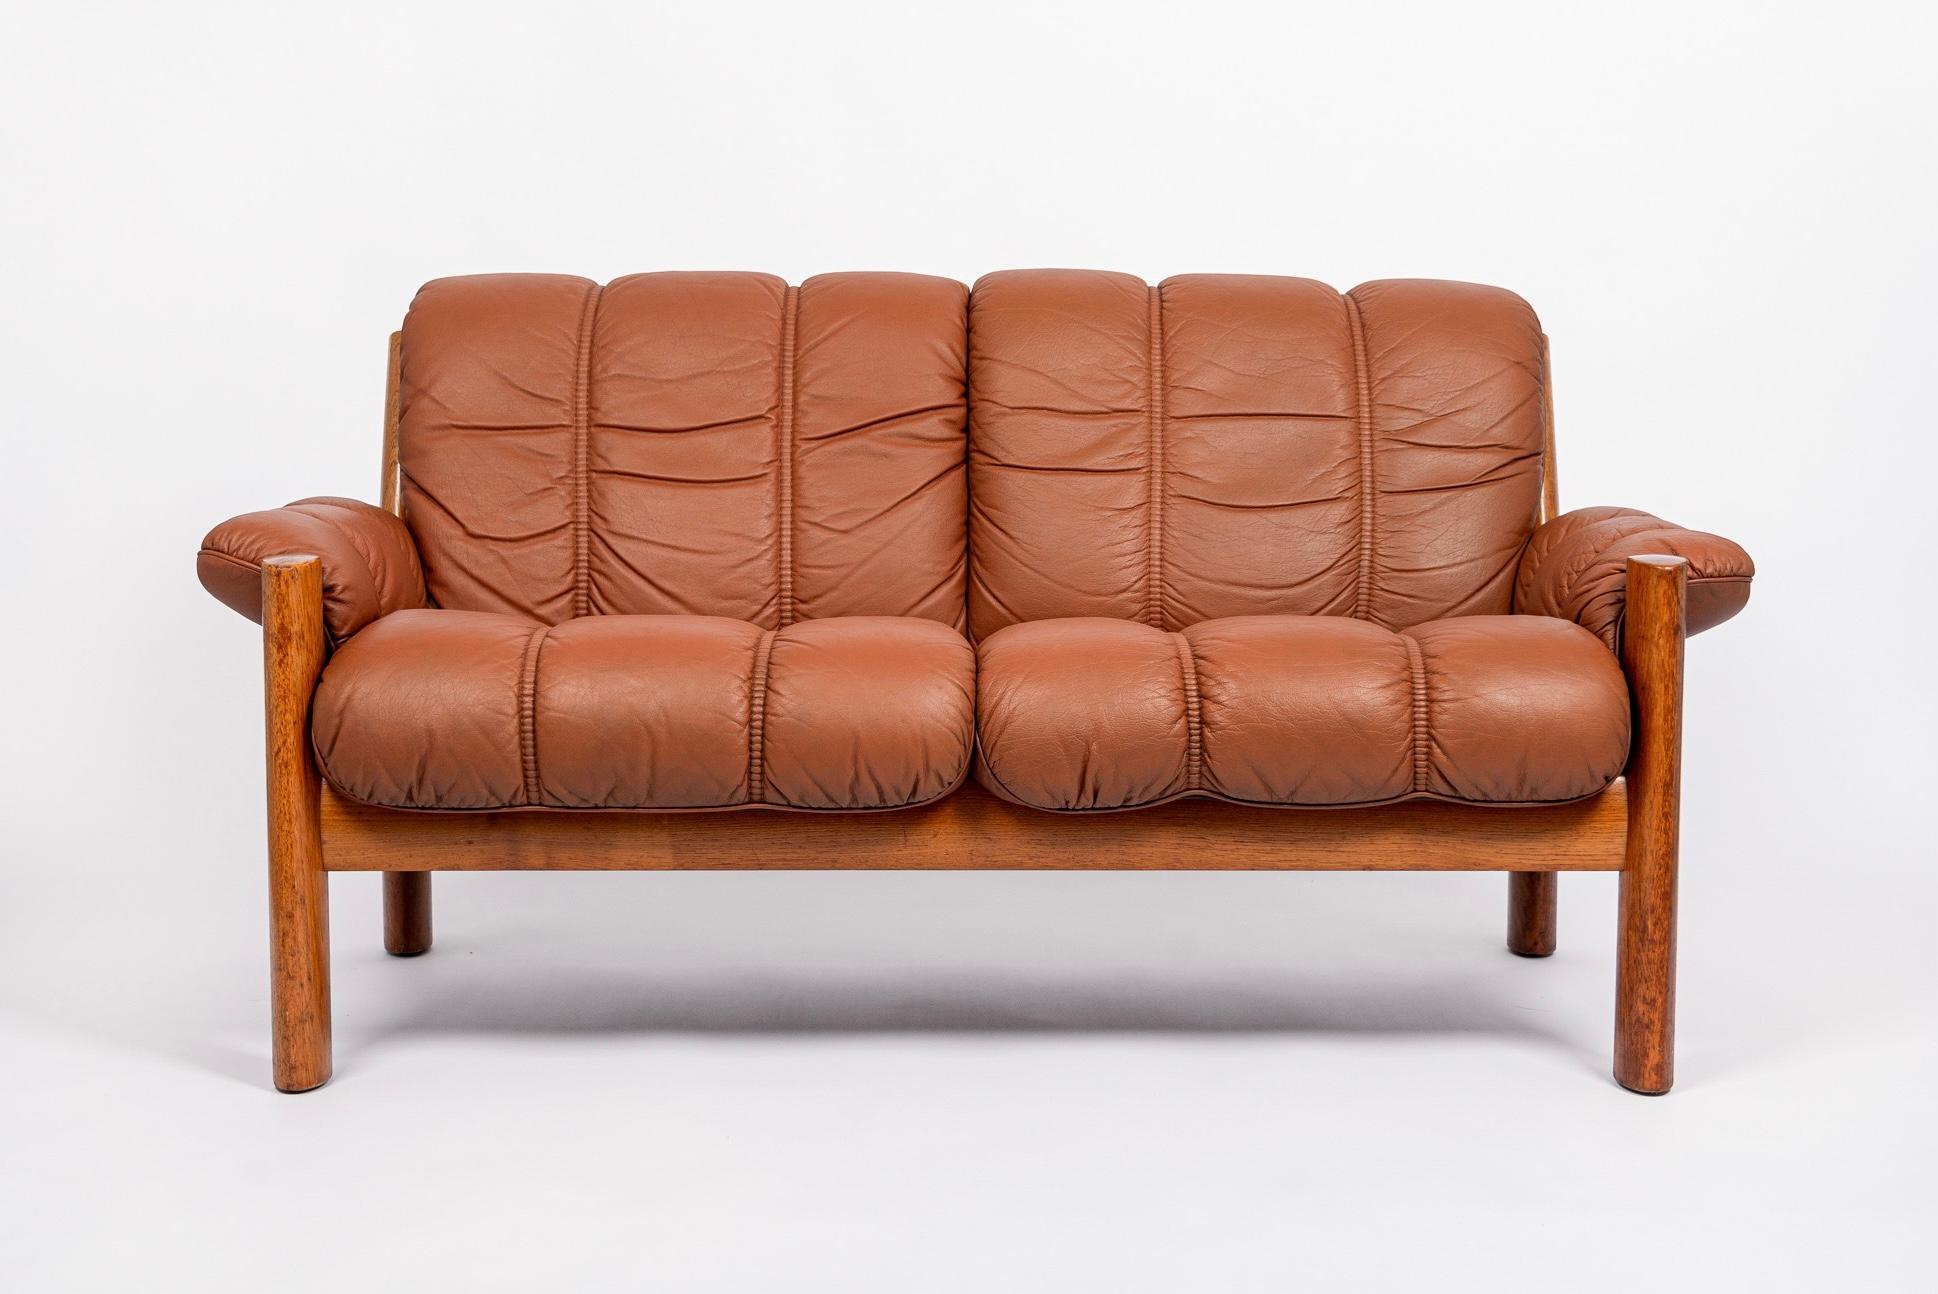 This vintage mid century modern Stressless Montana brown leather two-seat sofa was manufactured by Ekornes and made in Norway circa 1970. The sofa is designed for comfort and features a classic Scandinavian modern profile with clean, minimalist